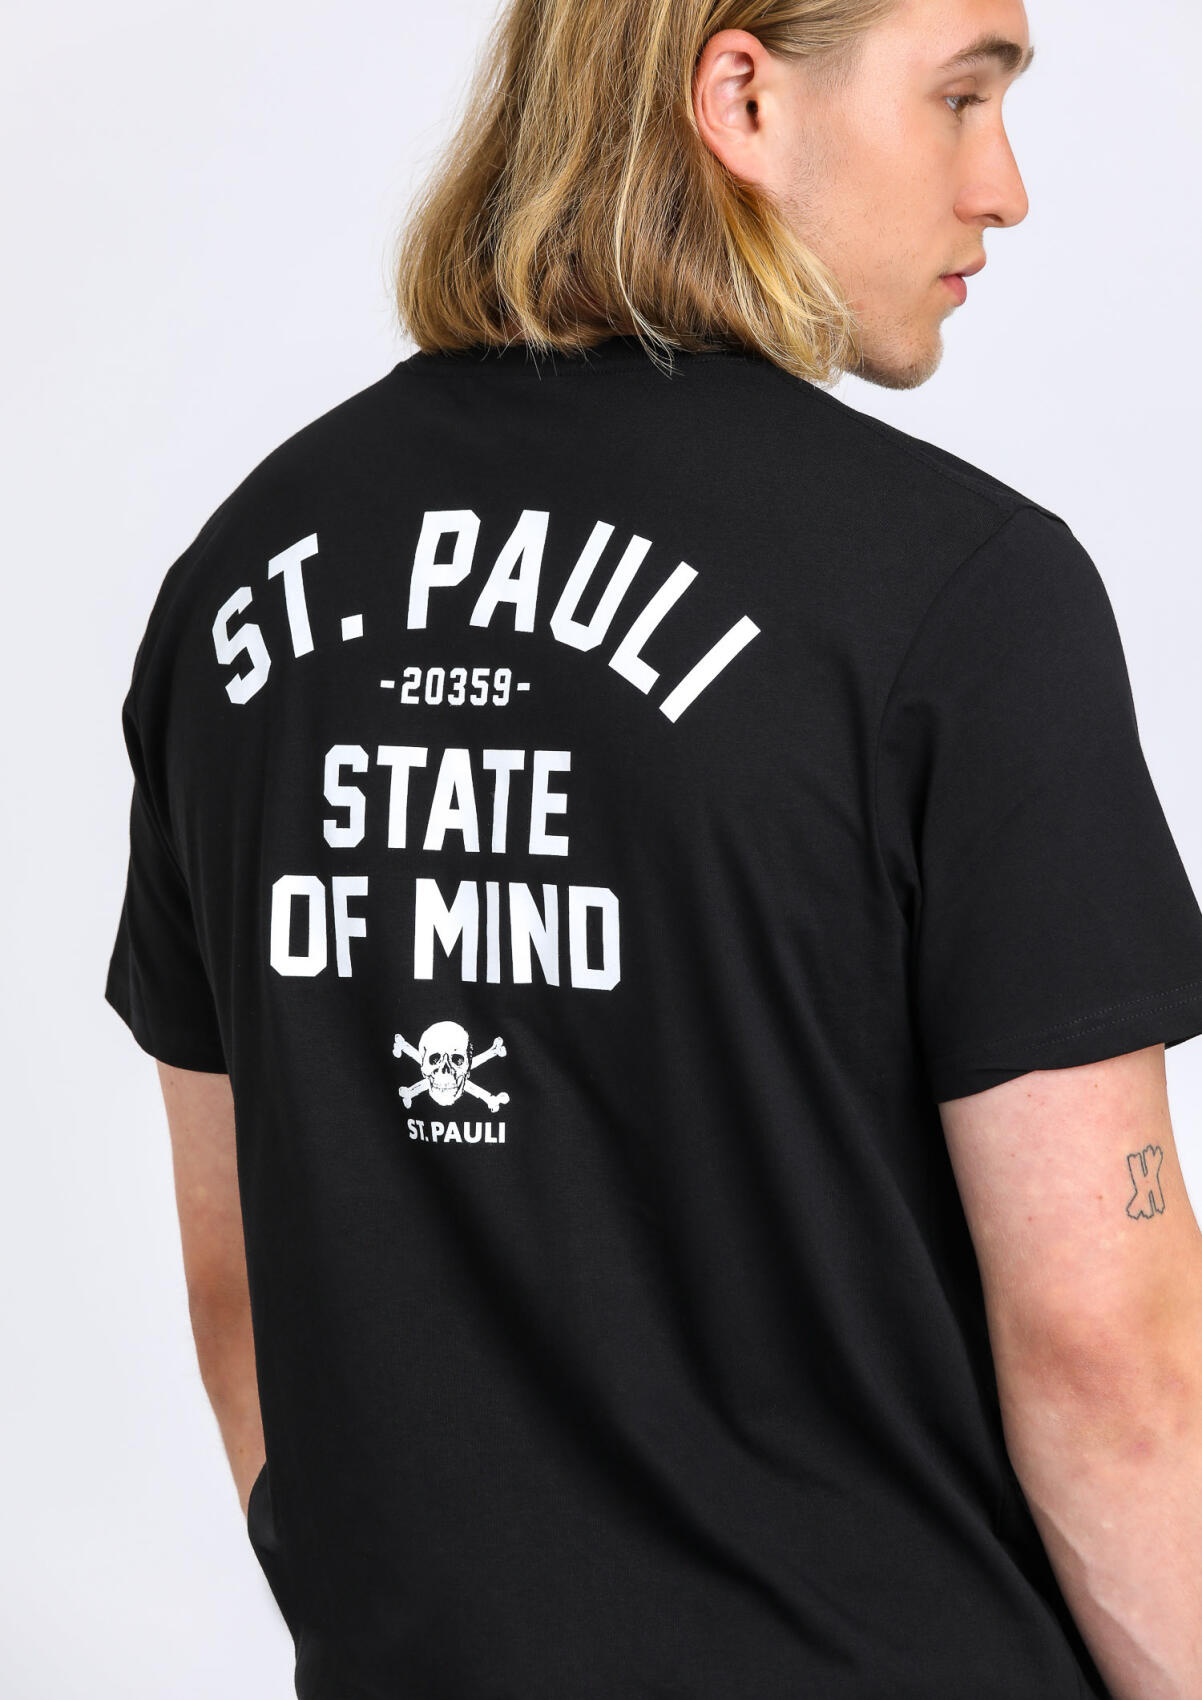 T-Shirt "20359 State Of Mind"